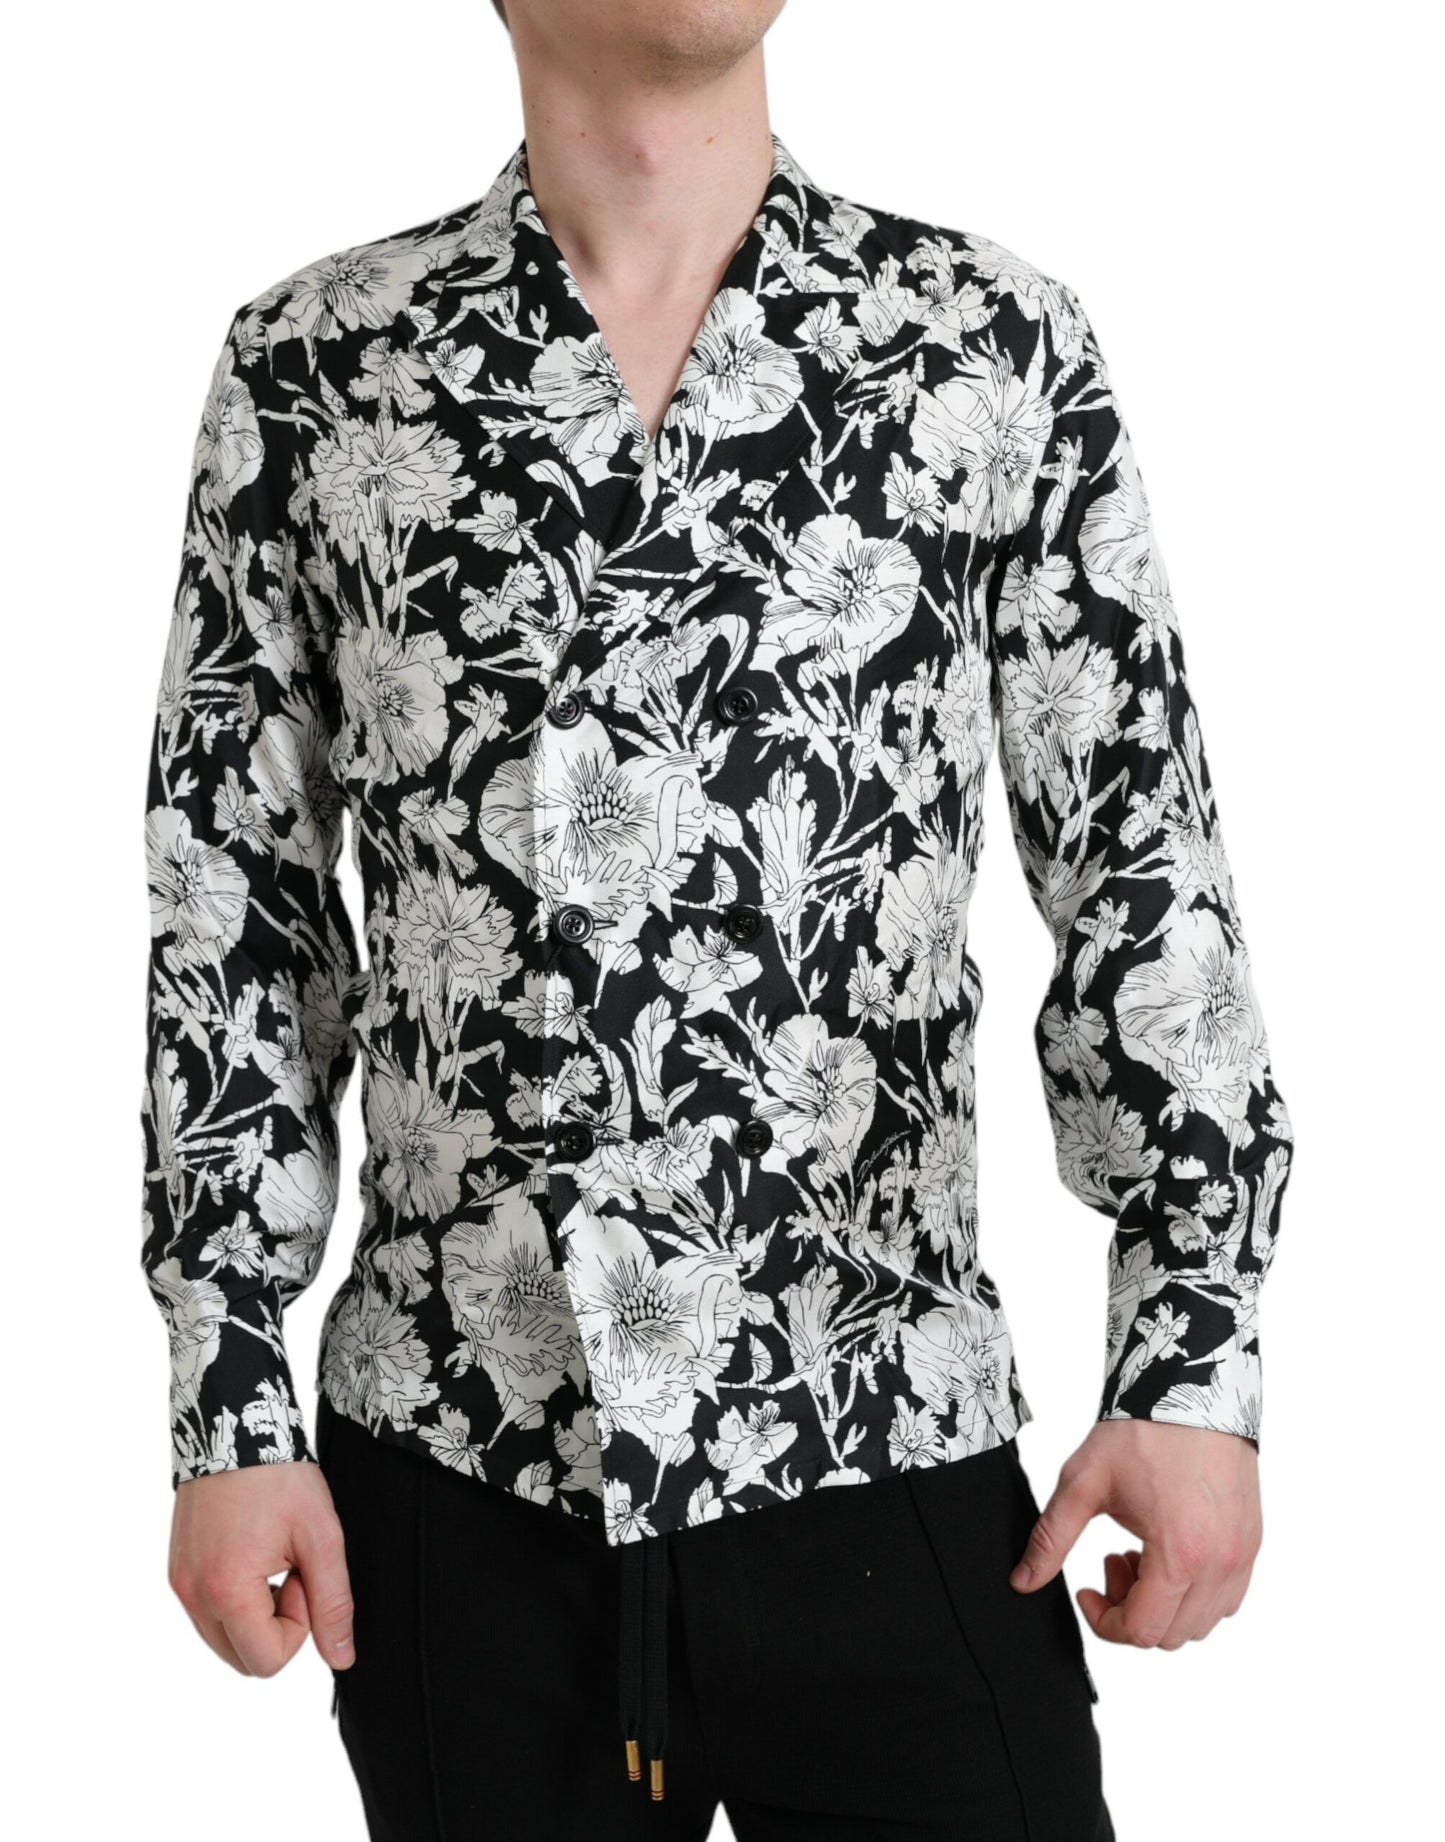 Dolce & Gabbana Black White Floral Button Down Casual Shirt - Gio Beverly Hills